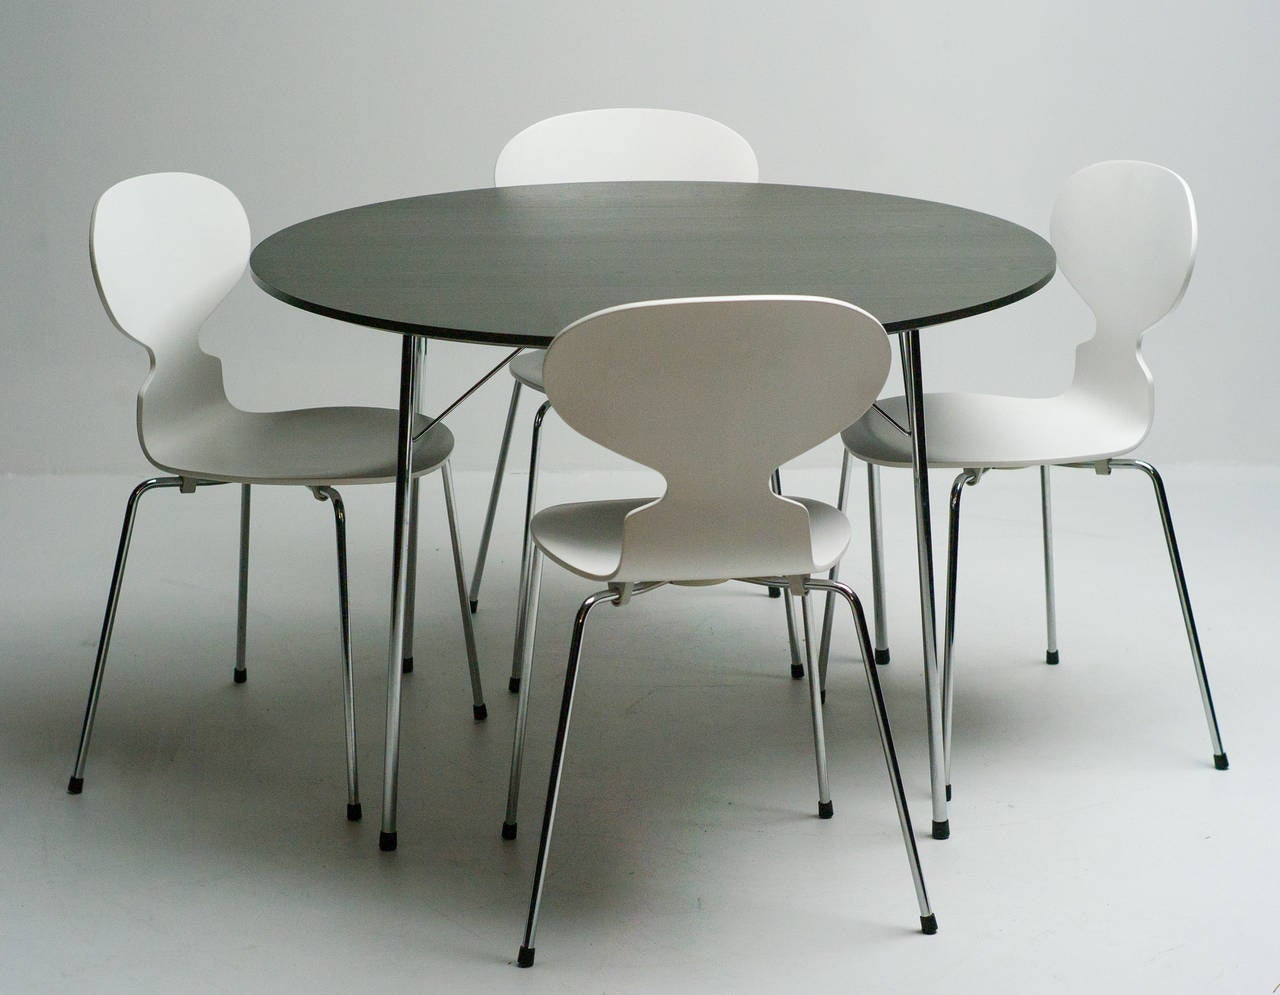 Table with dark grey lacquered top on polished chrome steel legs and stretchers. Stacking 